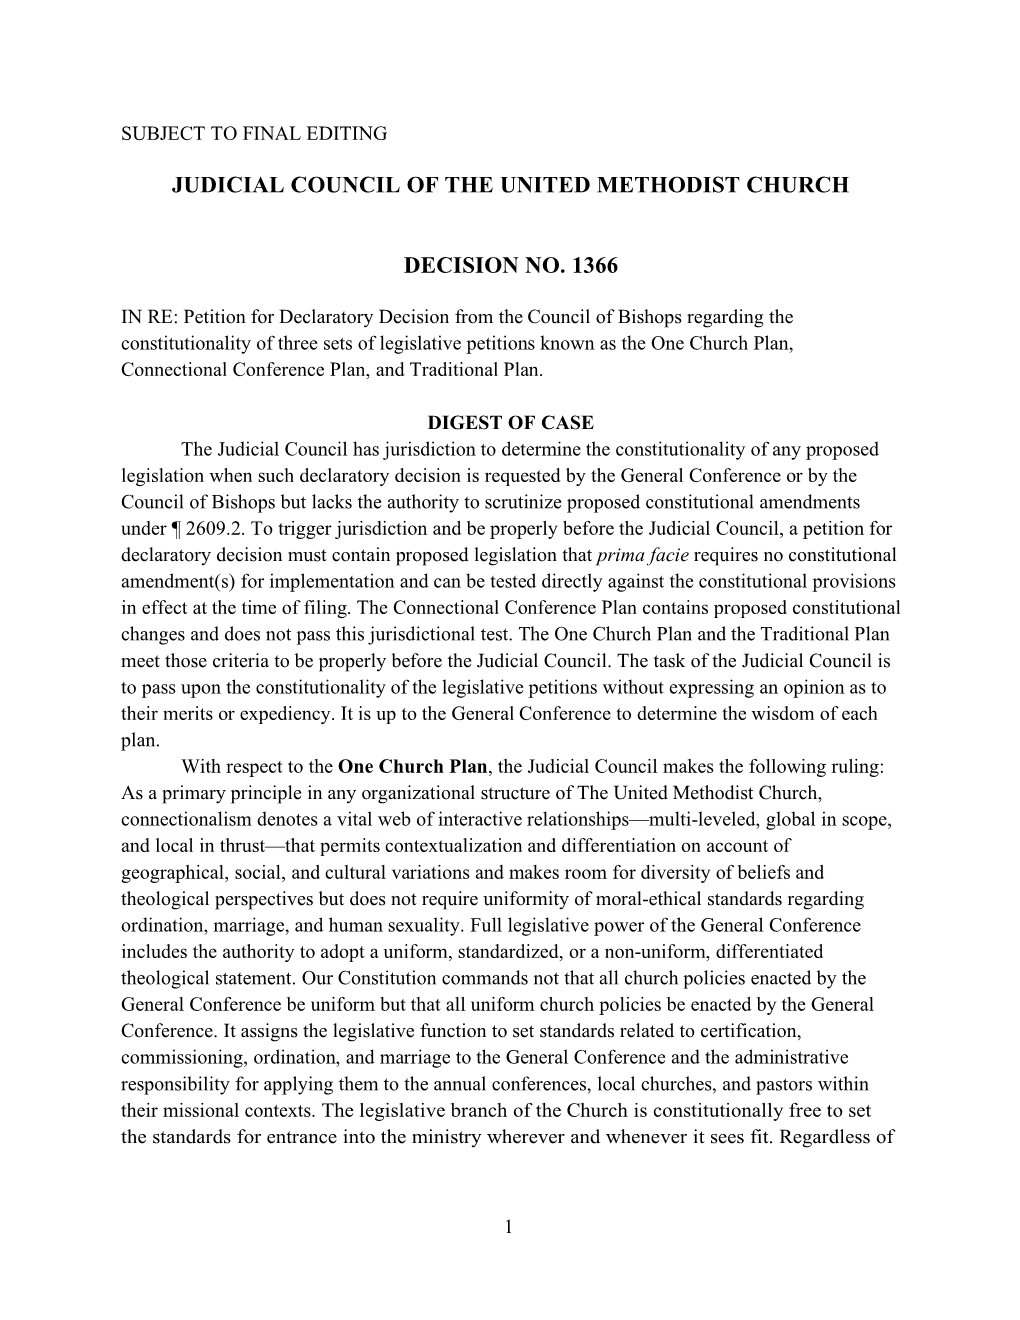 Judicial Council of the United Methodist Church Decision